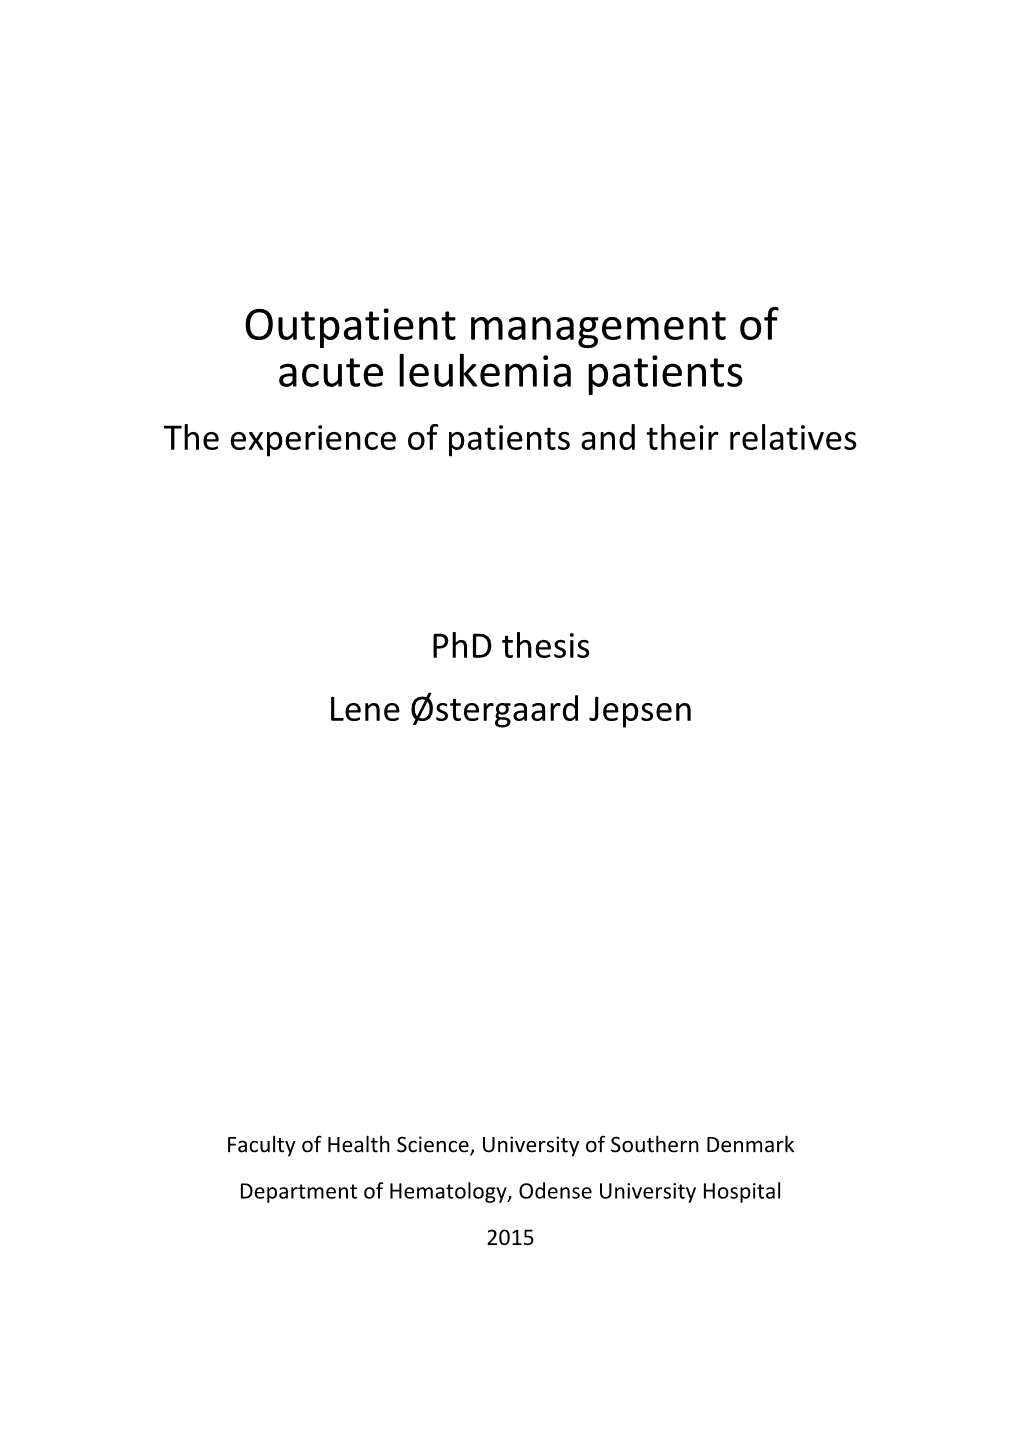 Outpatient Management of Acute Leukemia Patients the Experience of Patients and Their Relatives